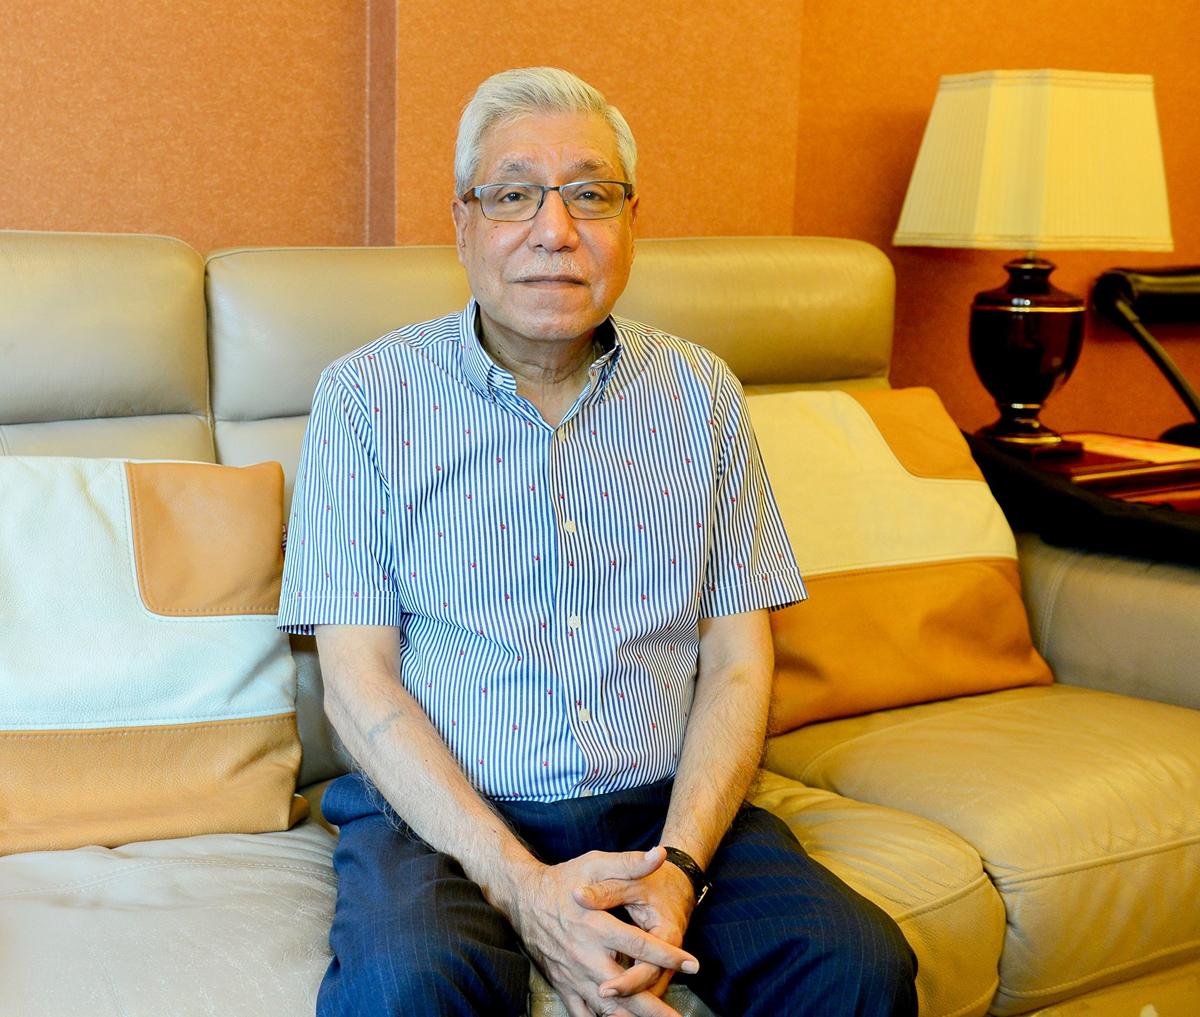 Mohan Chugani, former head of the Hong Kong Indian Association, poses at his home on Oct. 21, 2019 during an interview withe the Chinese-language Epoch Times. (Song Bilong/The Epoch Times)